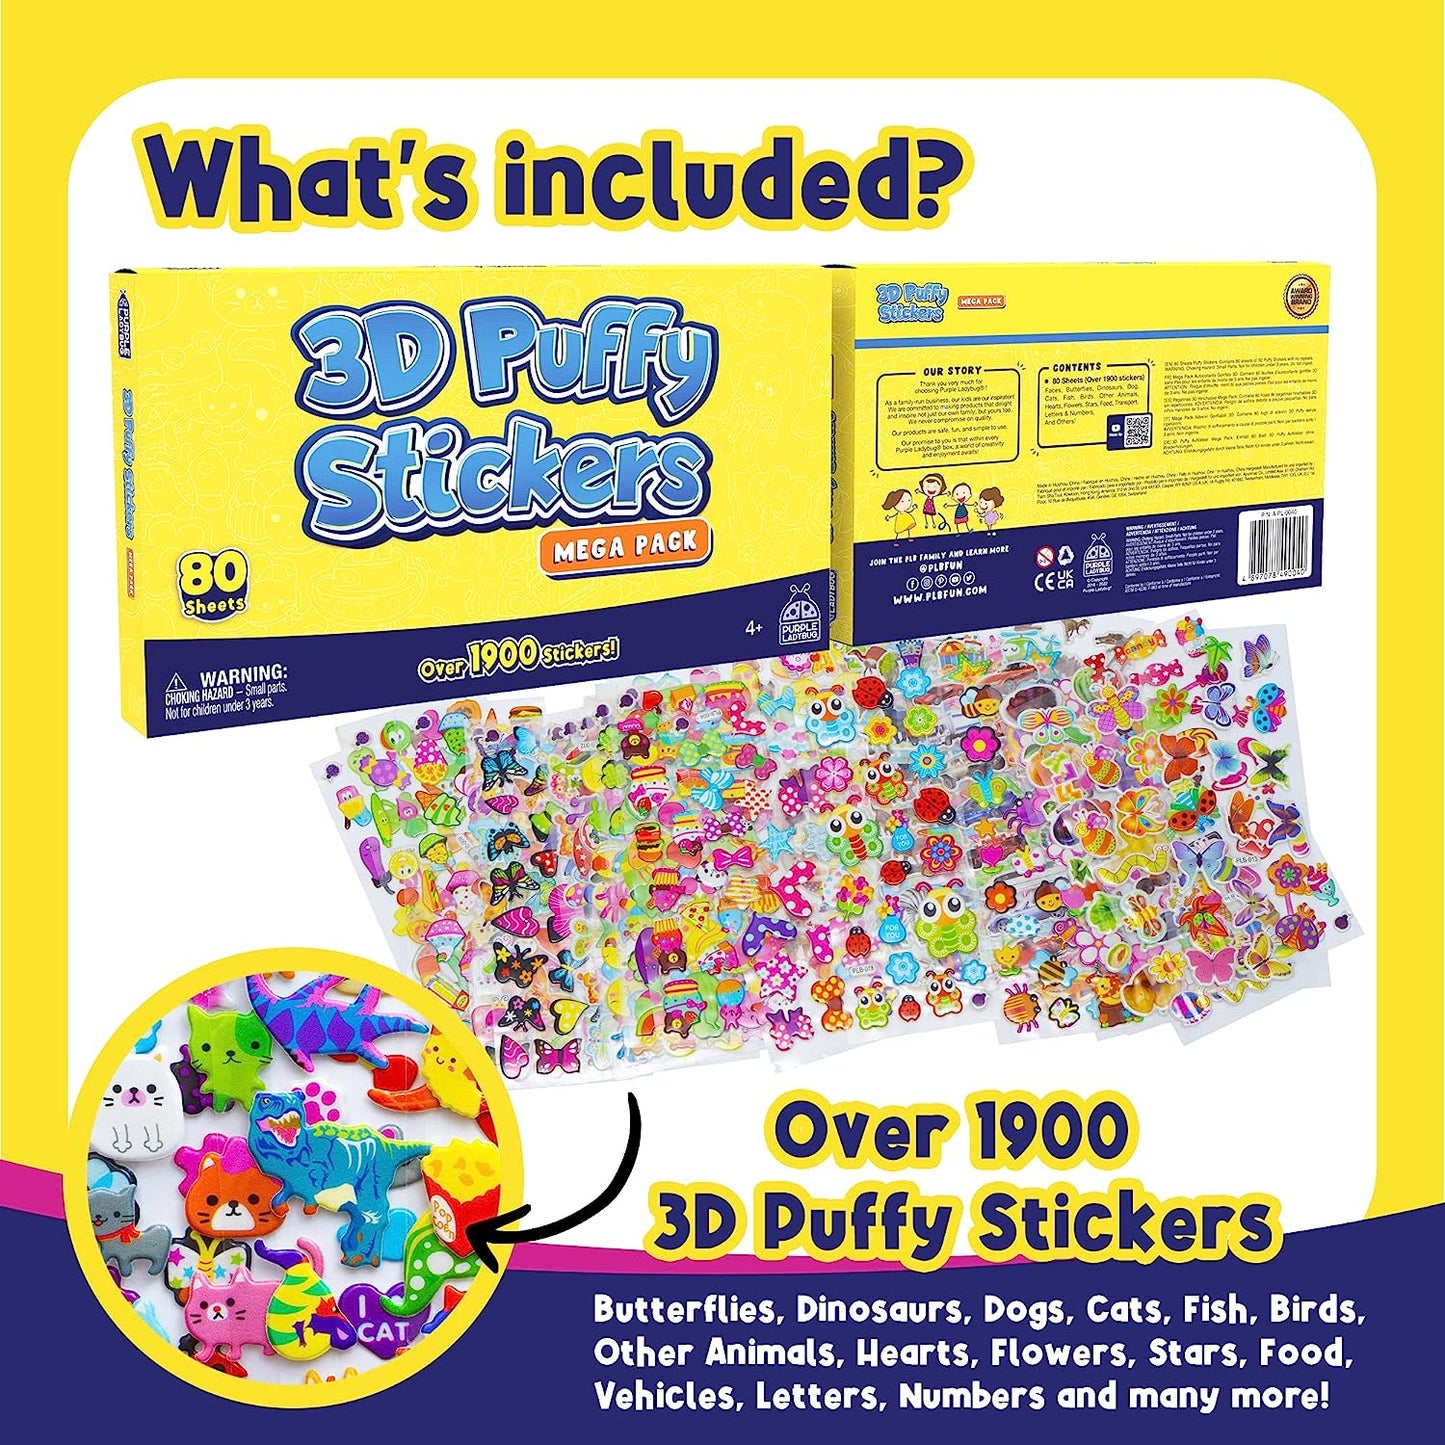 3D Puffy Stickers - 80 Sheet Mega Pack